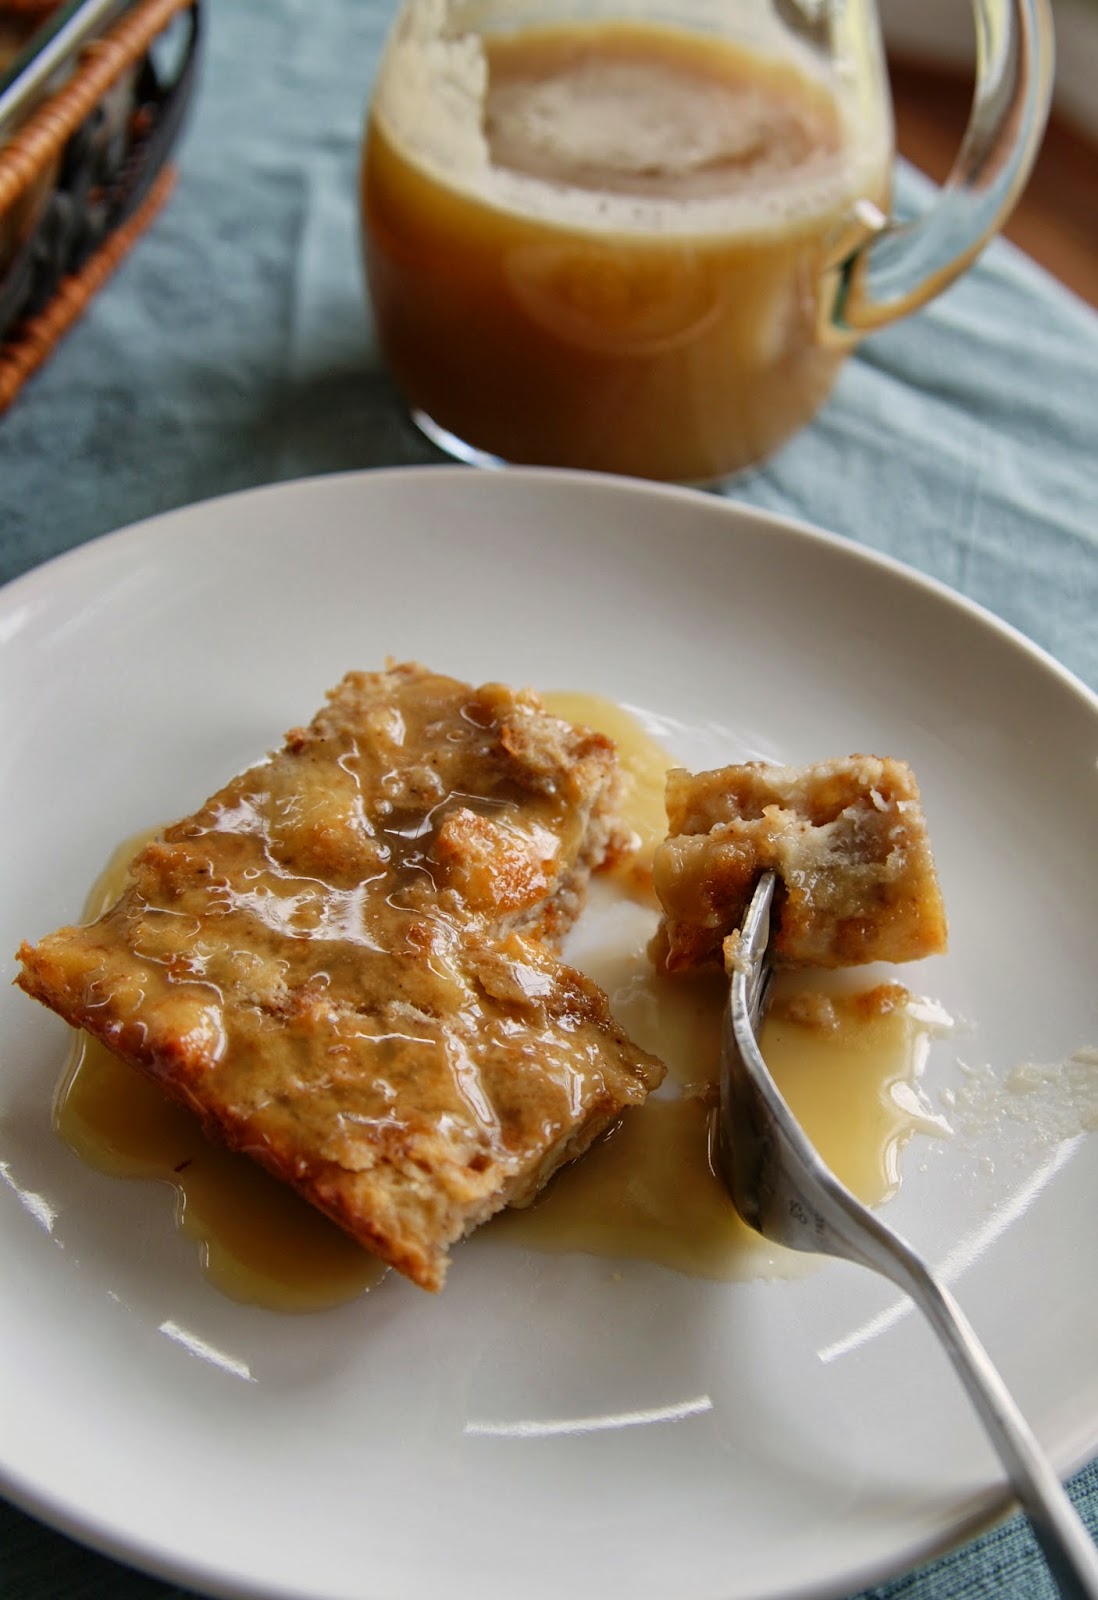 Alice and the Mock Turtle: Old Fashioned Bread Pudding with Vanilla Sauce